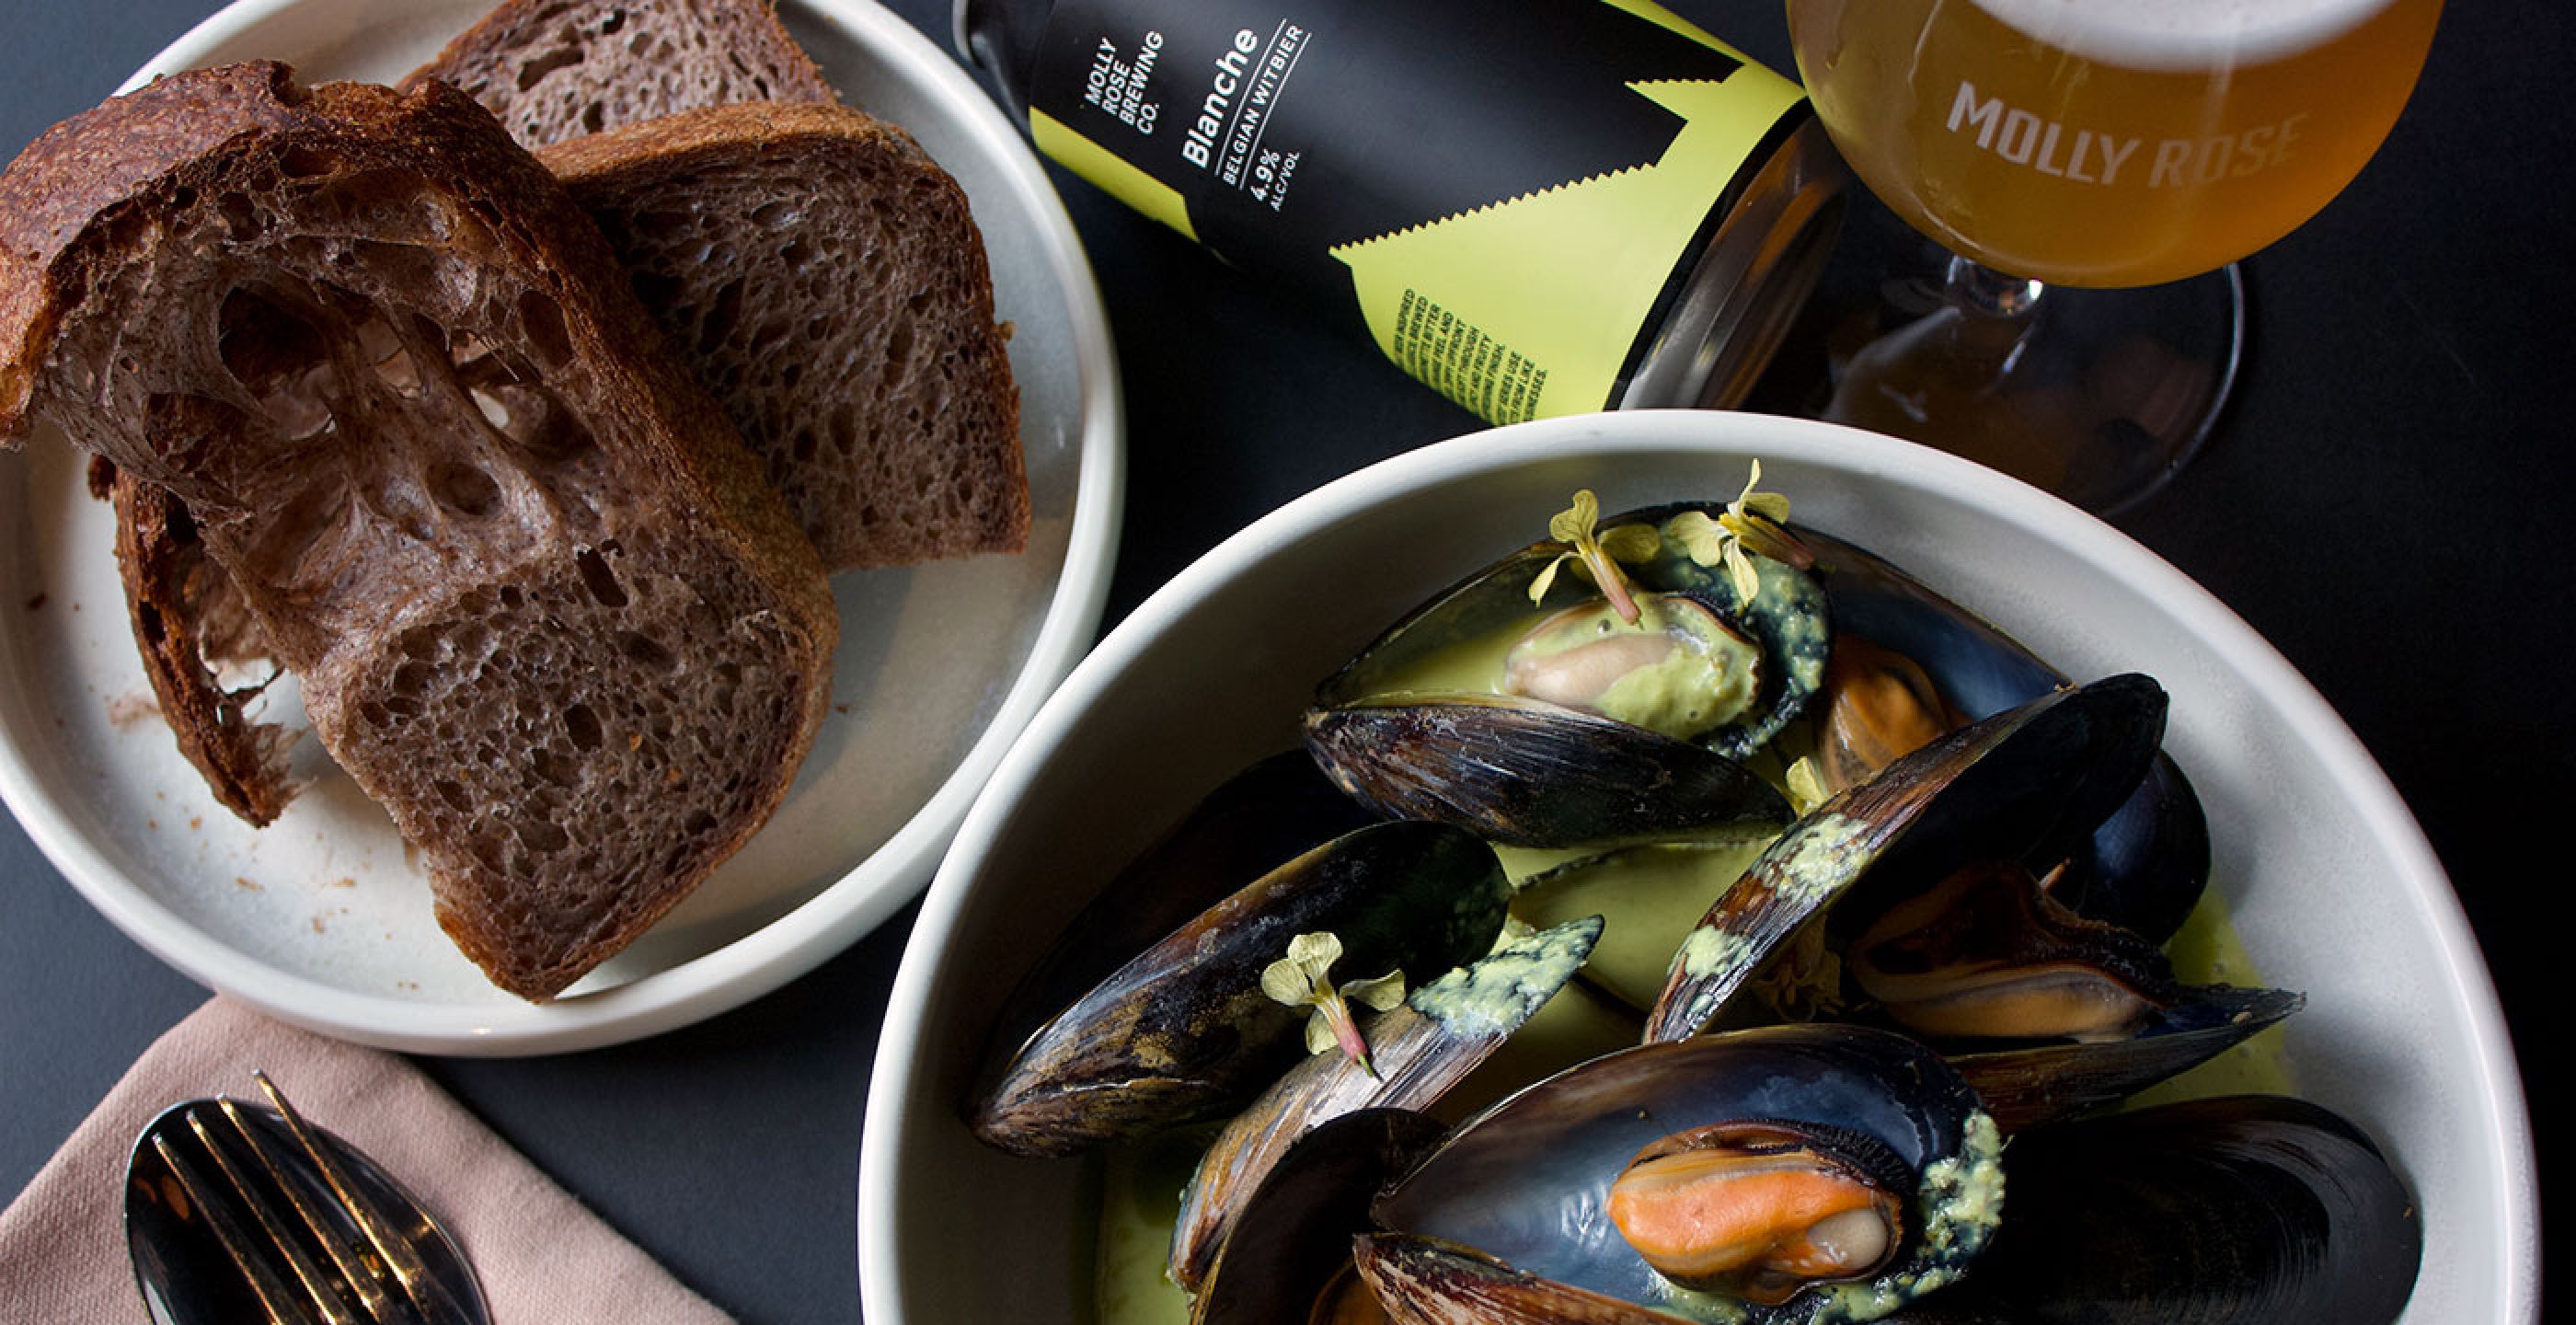 The Matchmakers: Pairing Mussels With Witbier